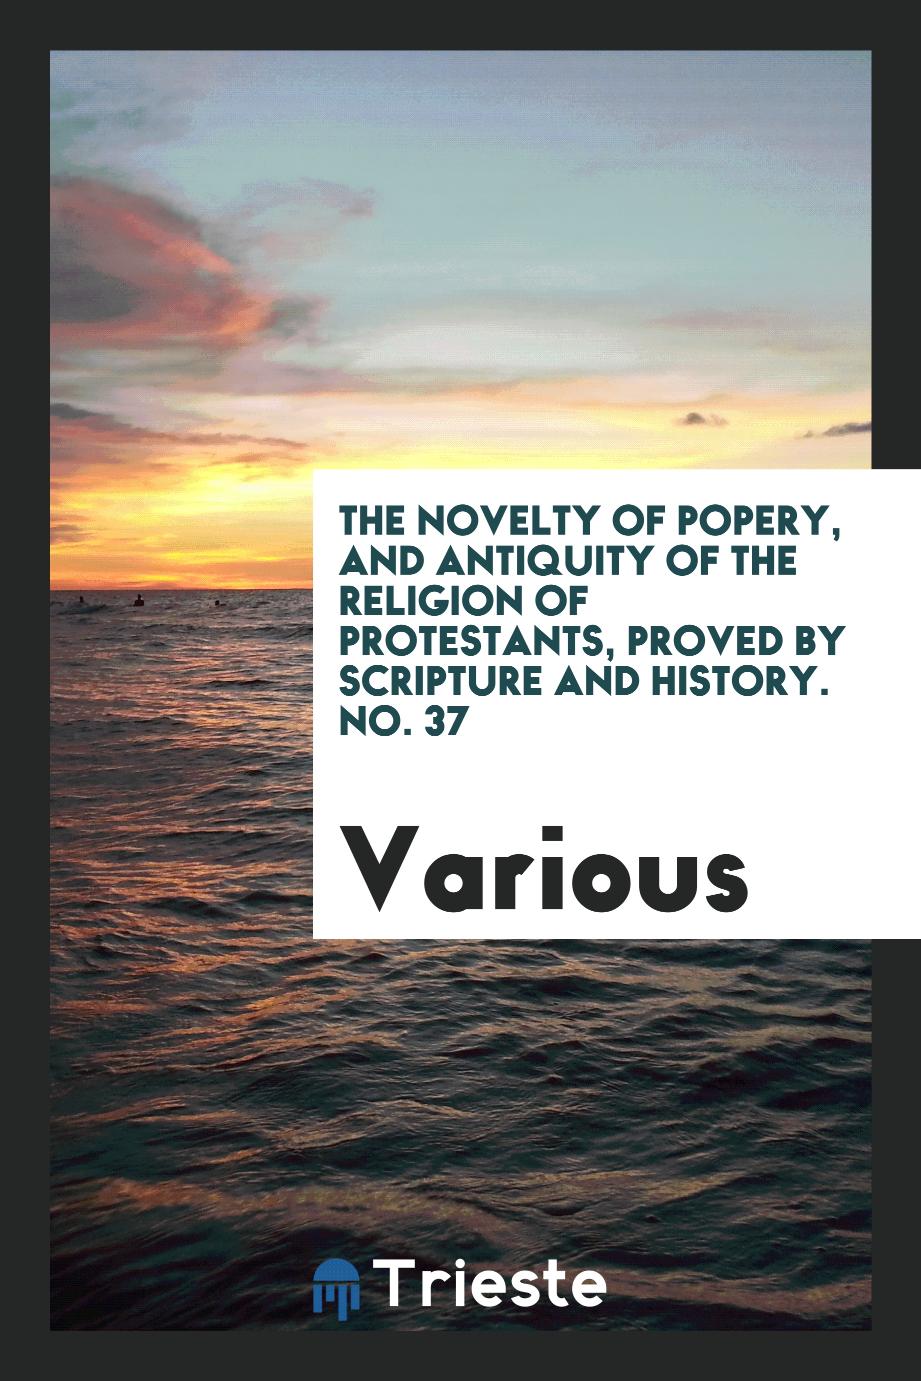 The Novelty of Popery, and Antiquity of the Religion of Protestants, Proved by Scripture and History. No. 37